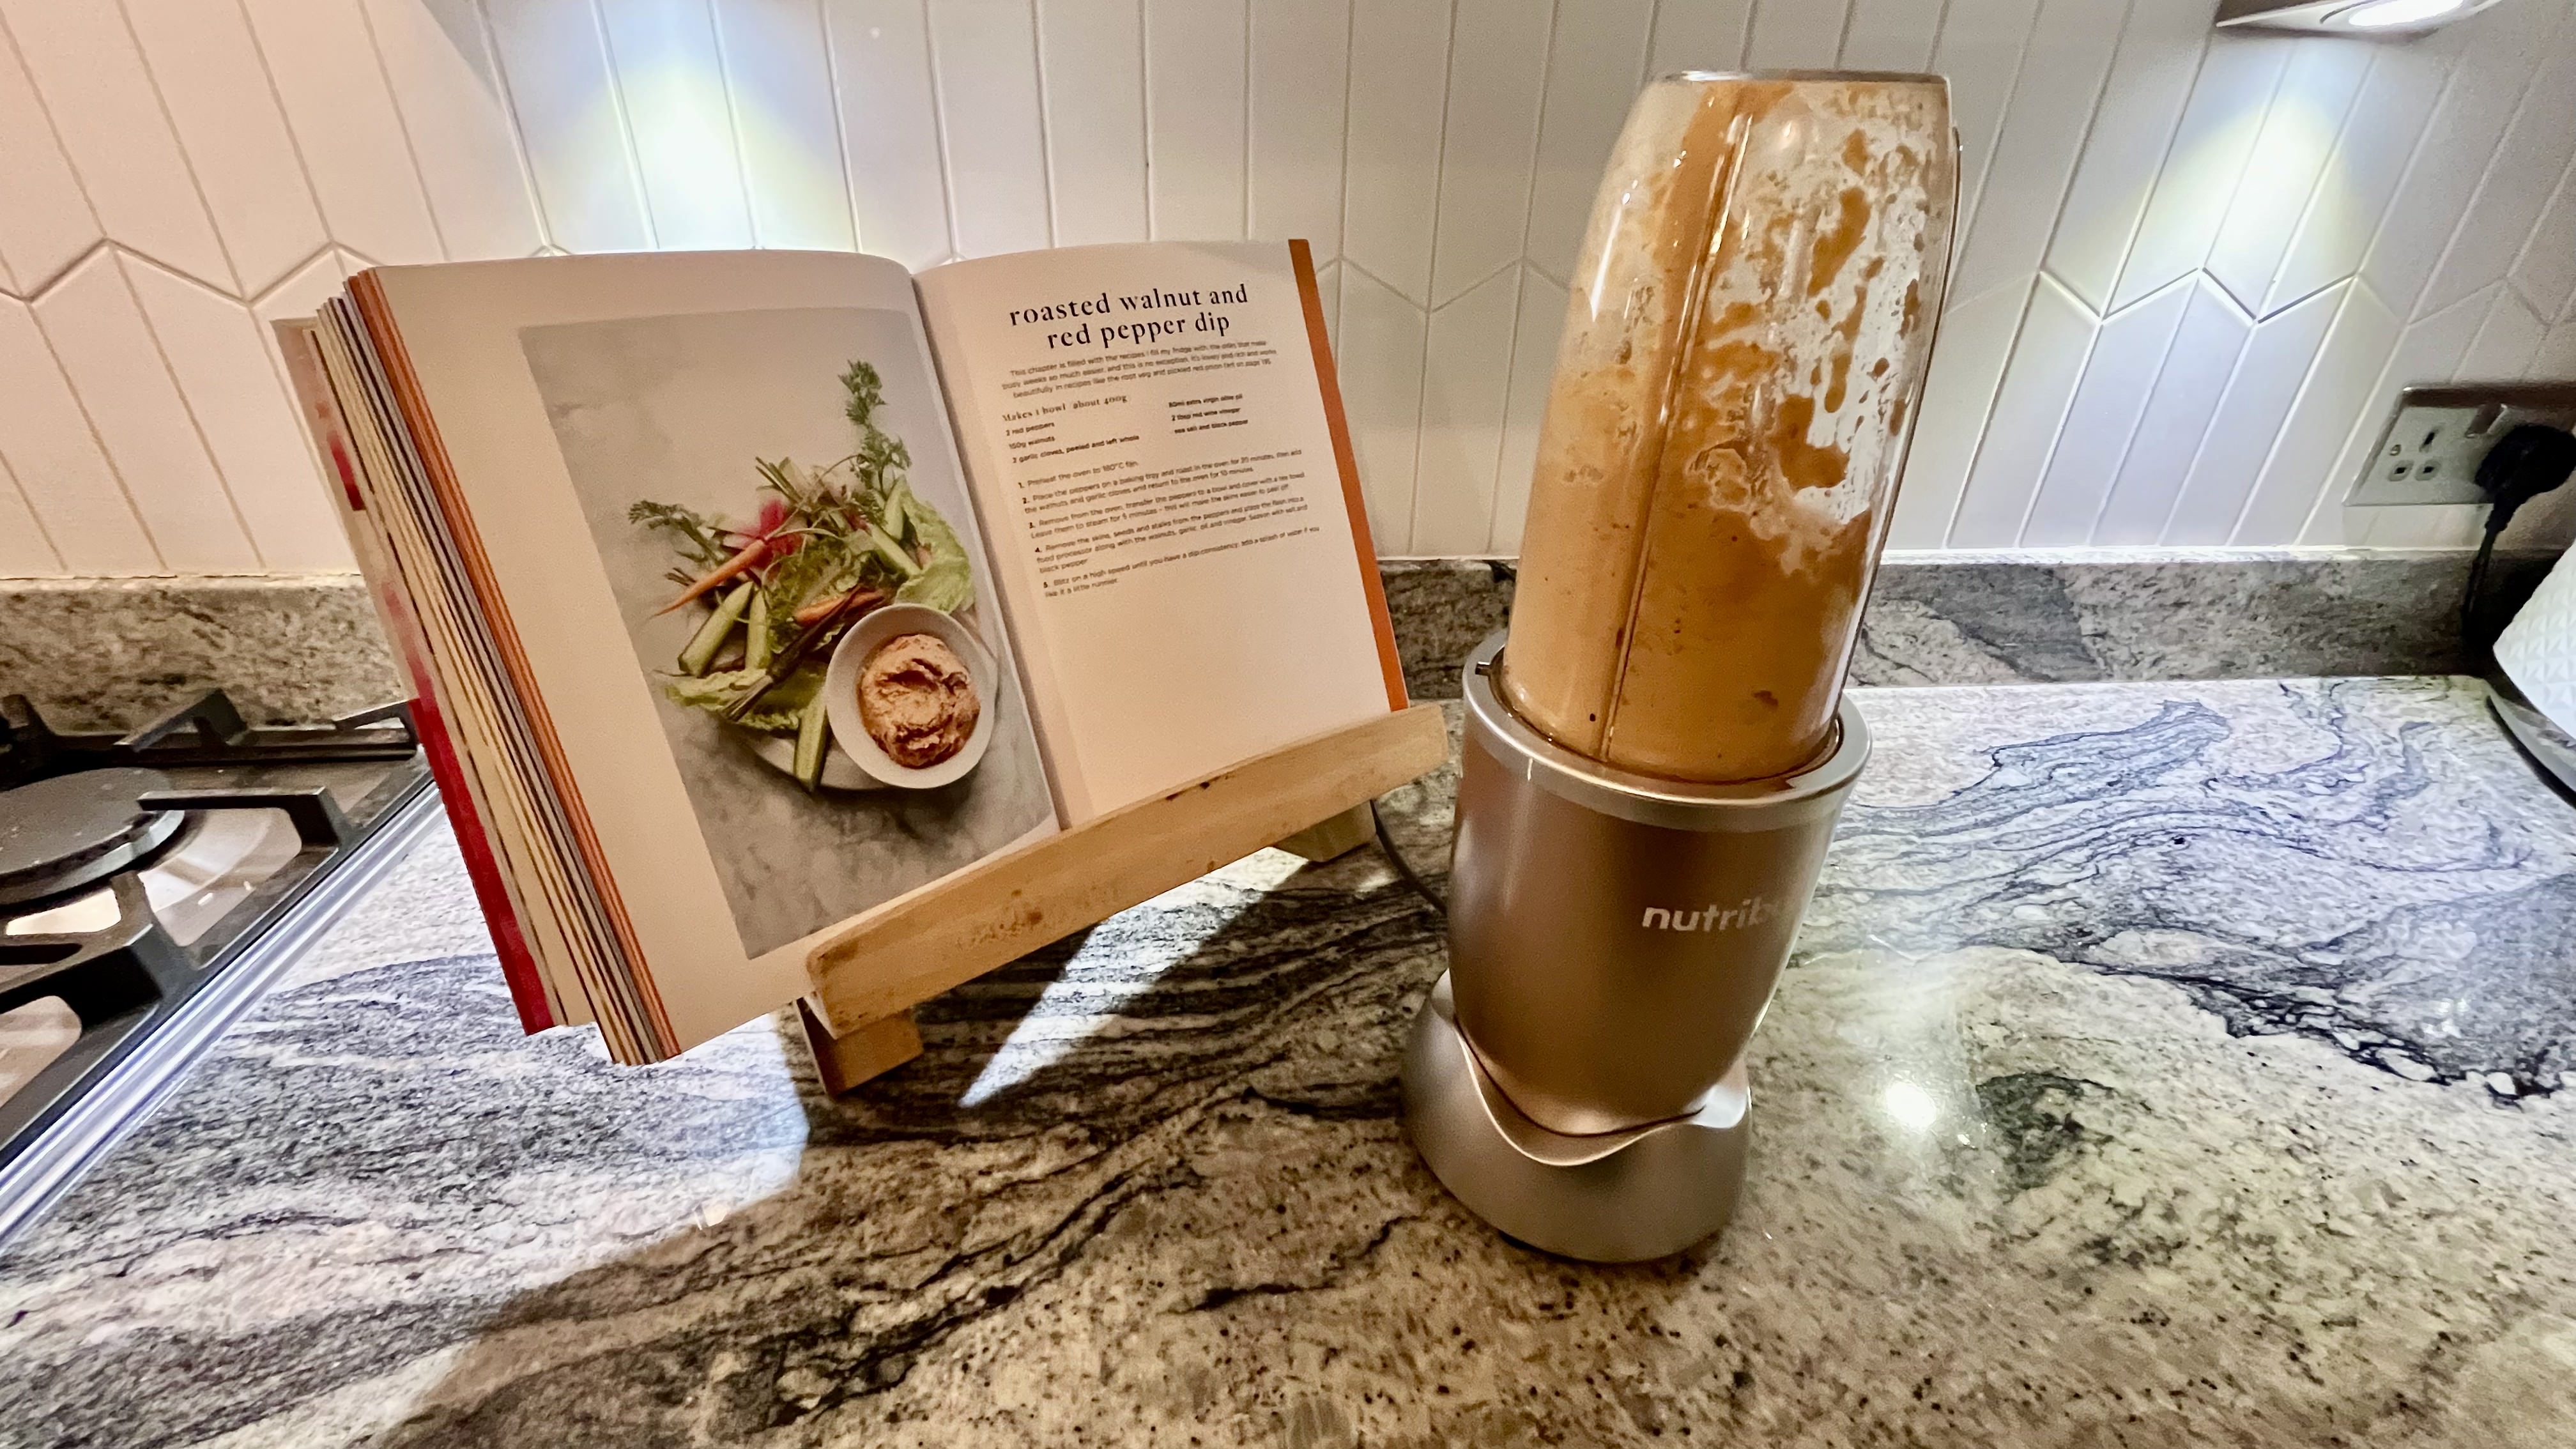 Nutribullet Pro 900 blender review: compact and convenient